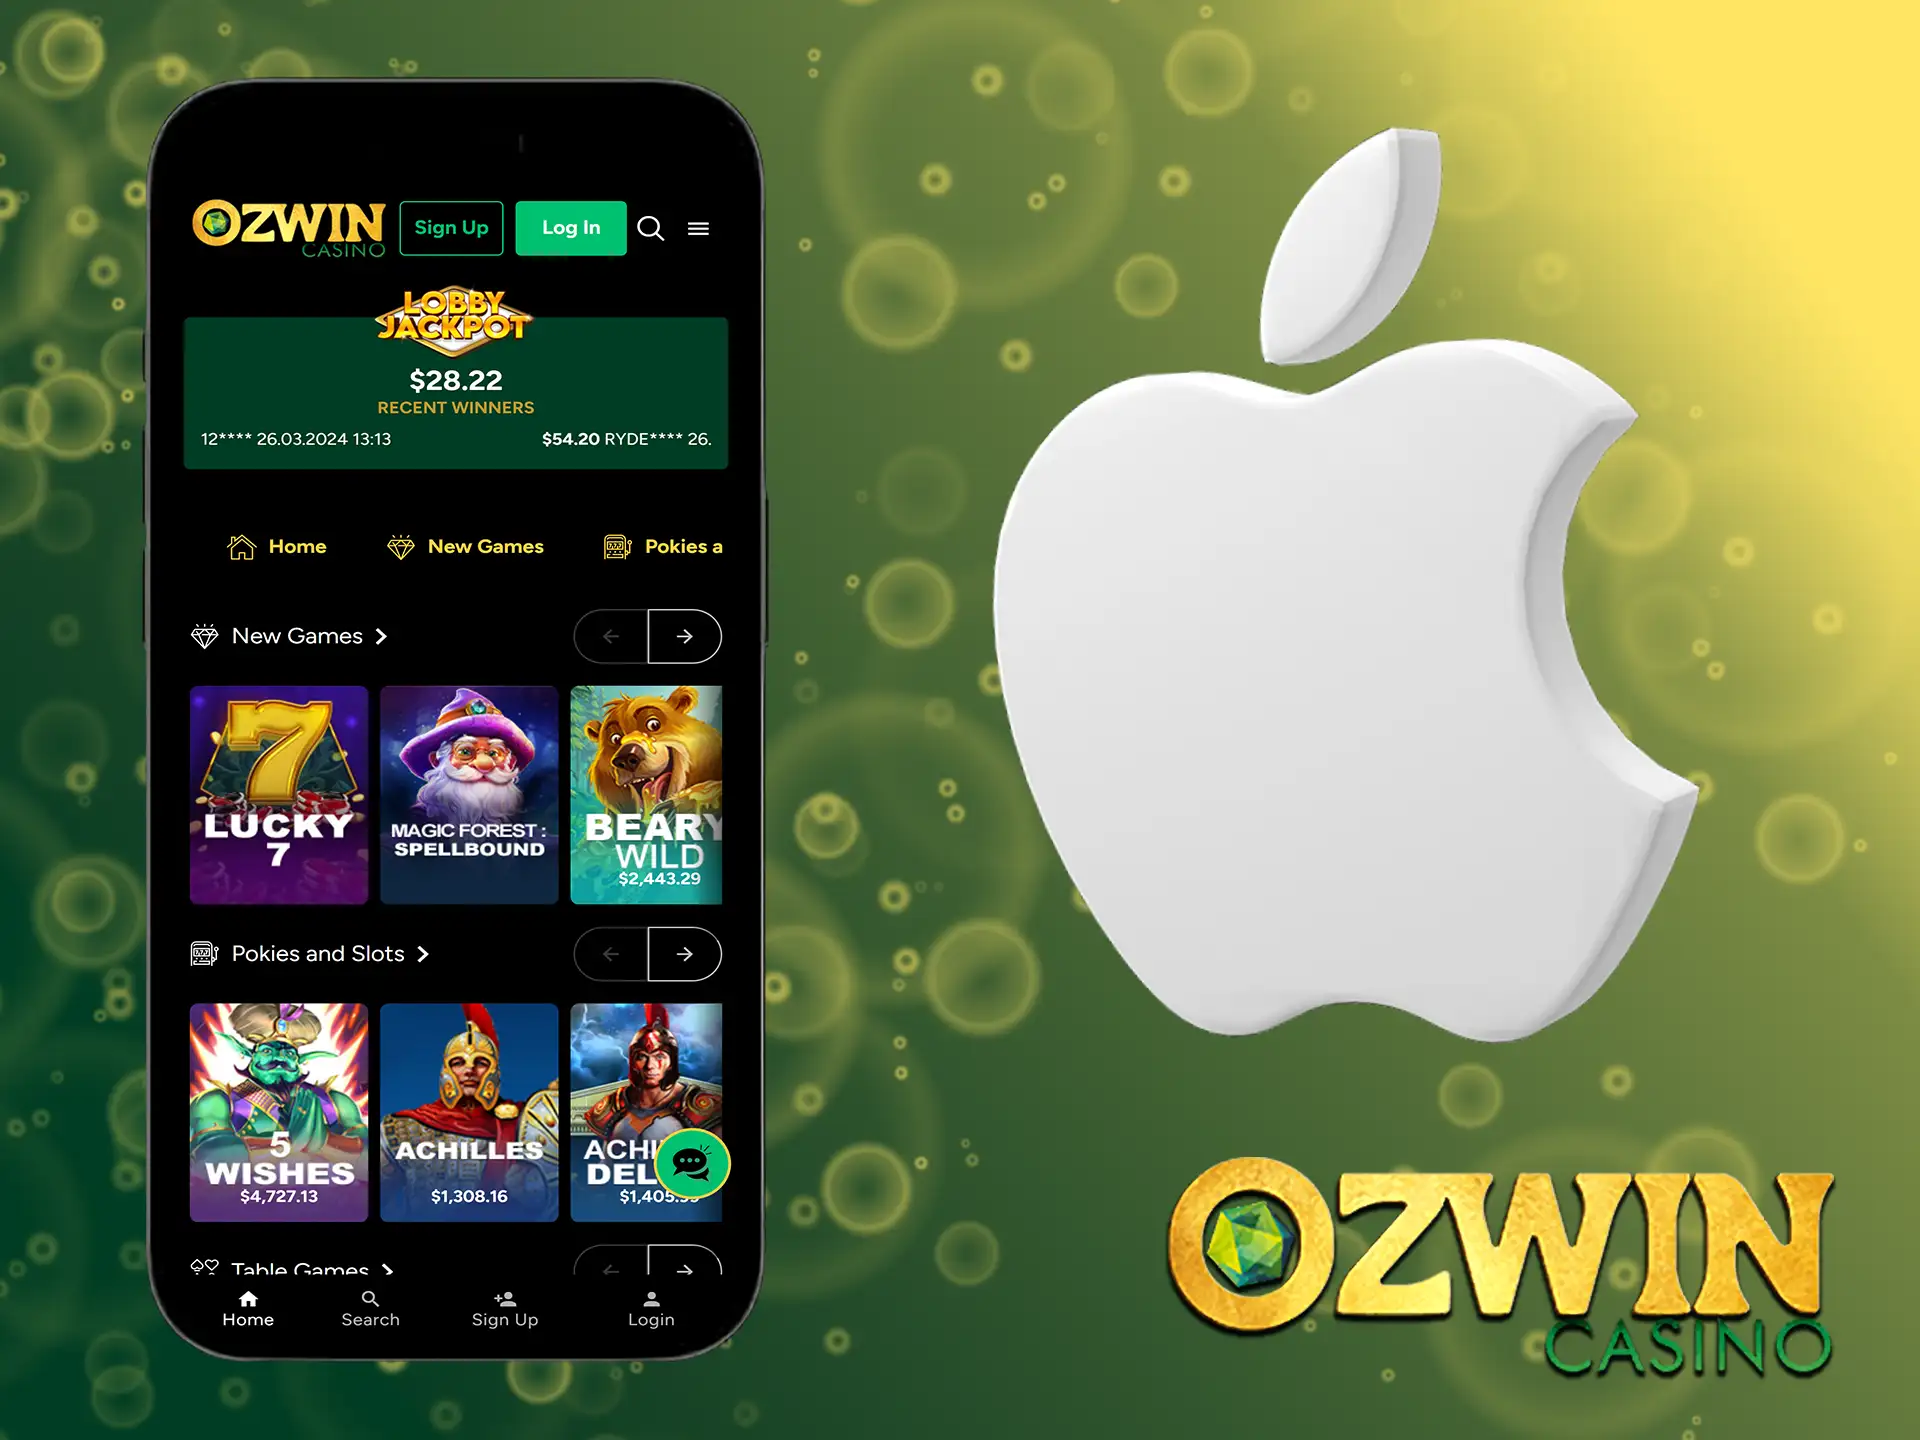 Our development team is working hard on a dedicated app to bring Ozwin to iOS.